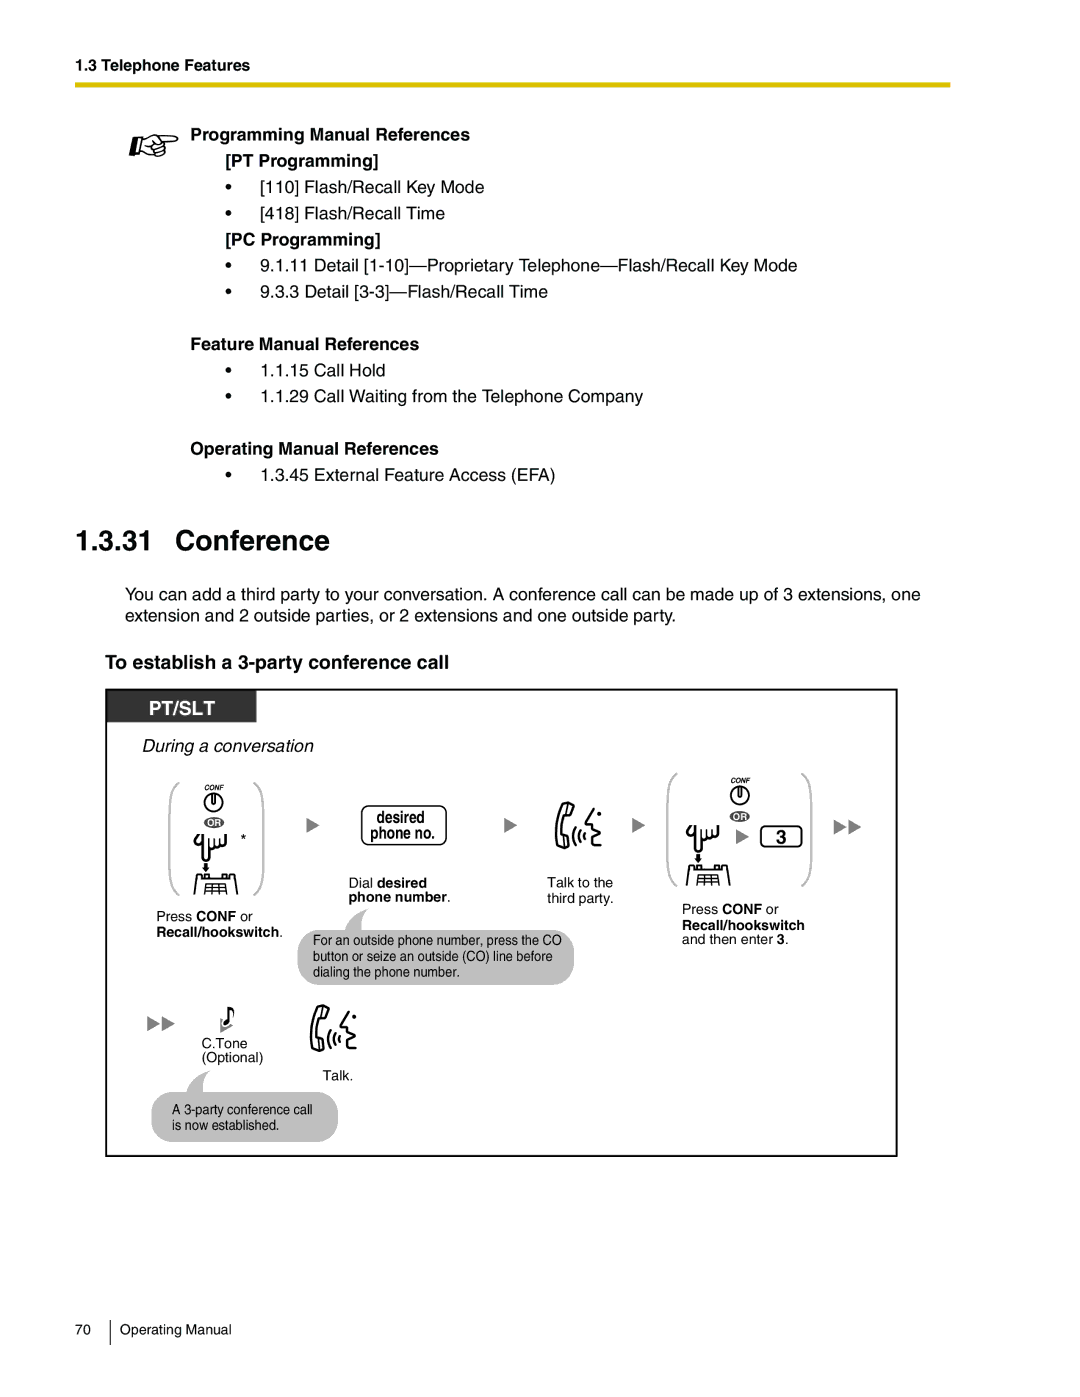 Panasonic KX-TA824 manual Conference, To establish a 3-party conference call 